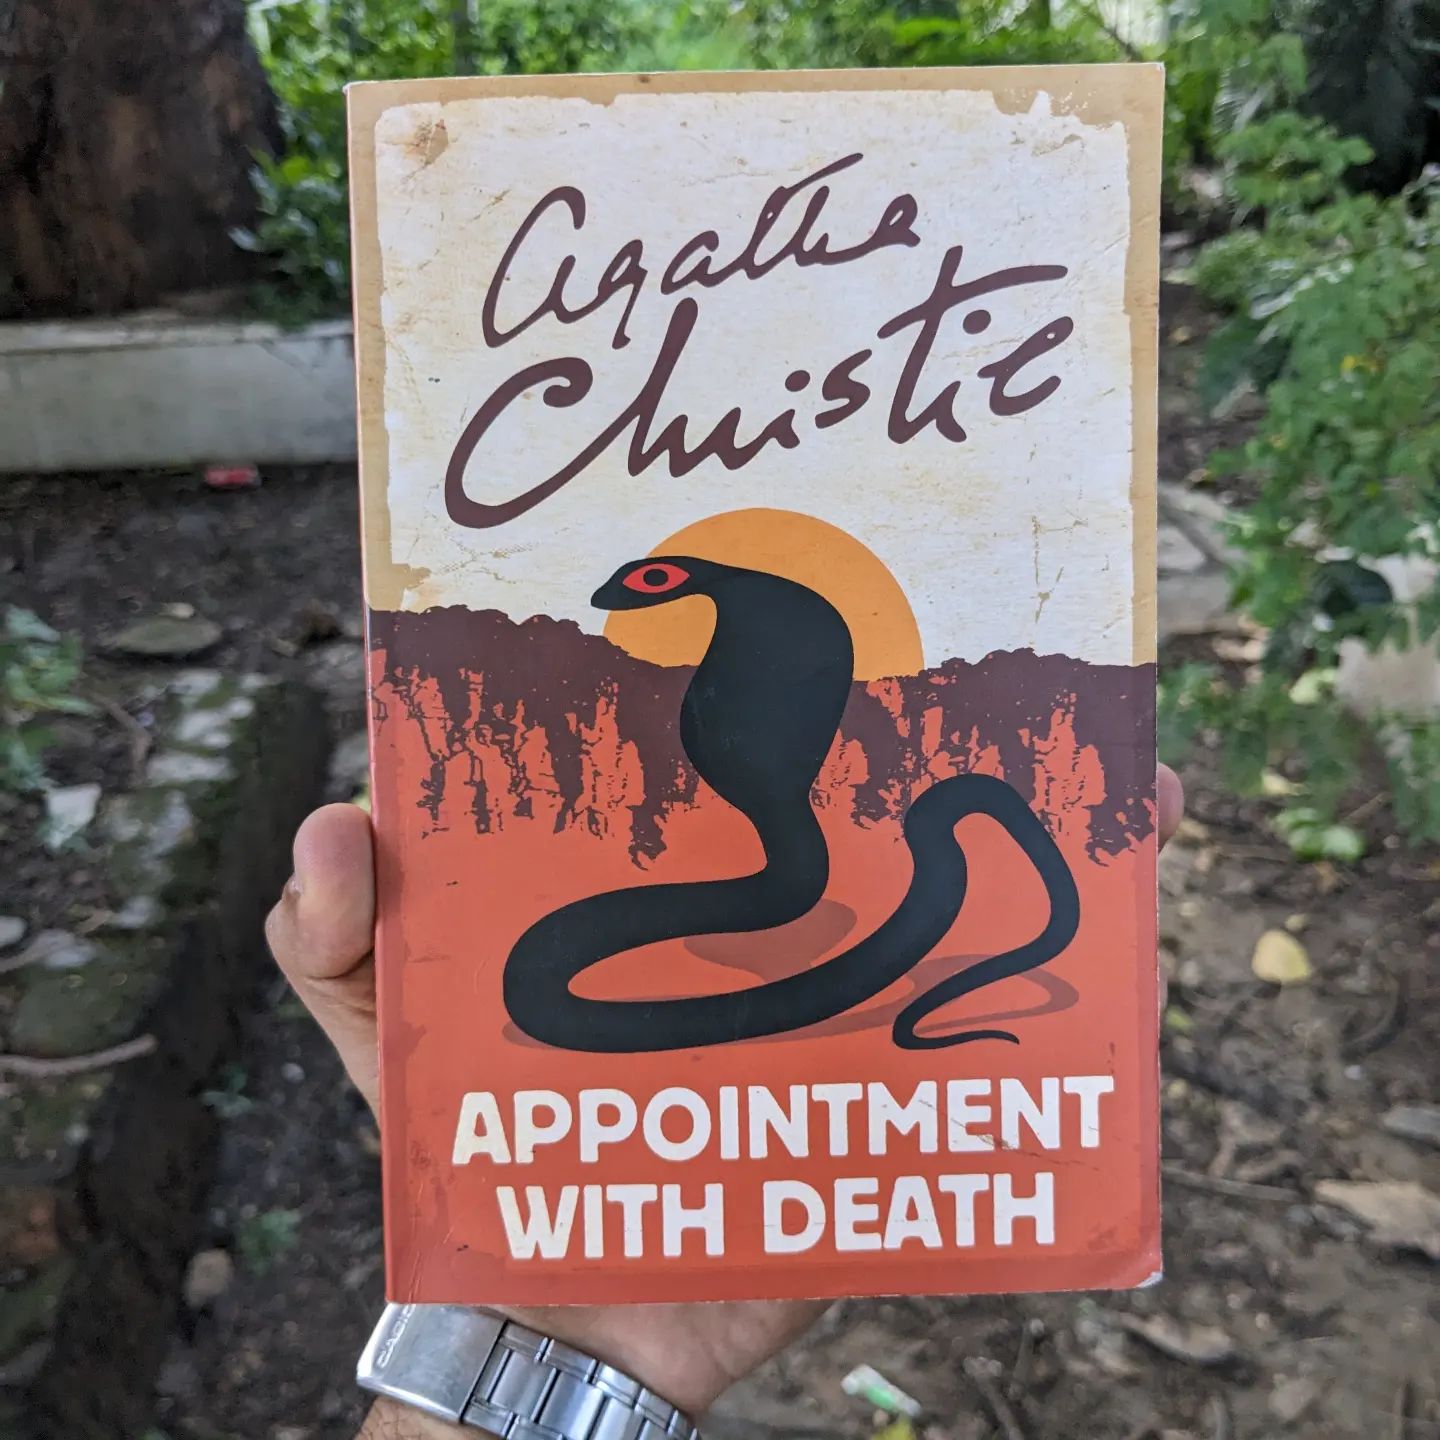  Appointment With Death in a gloomy location